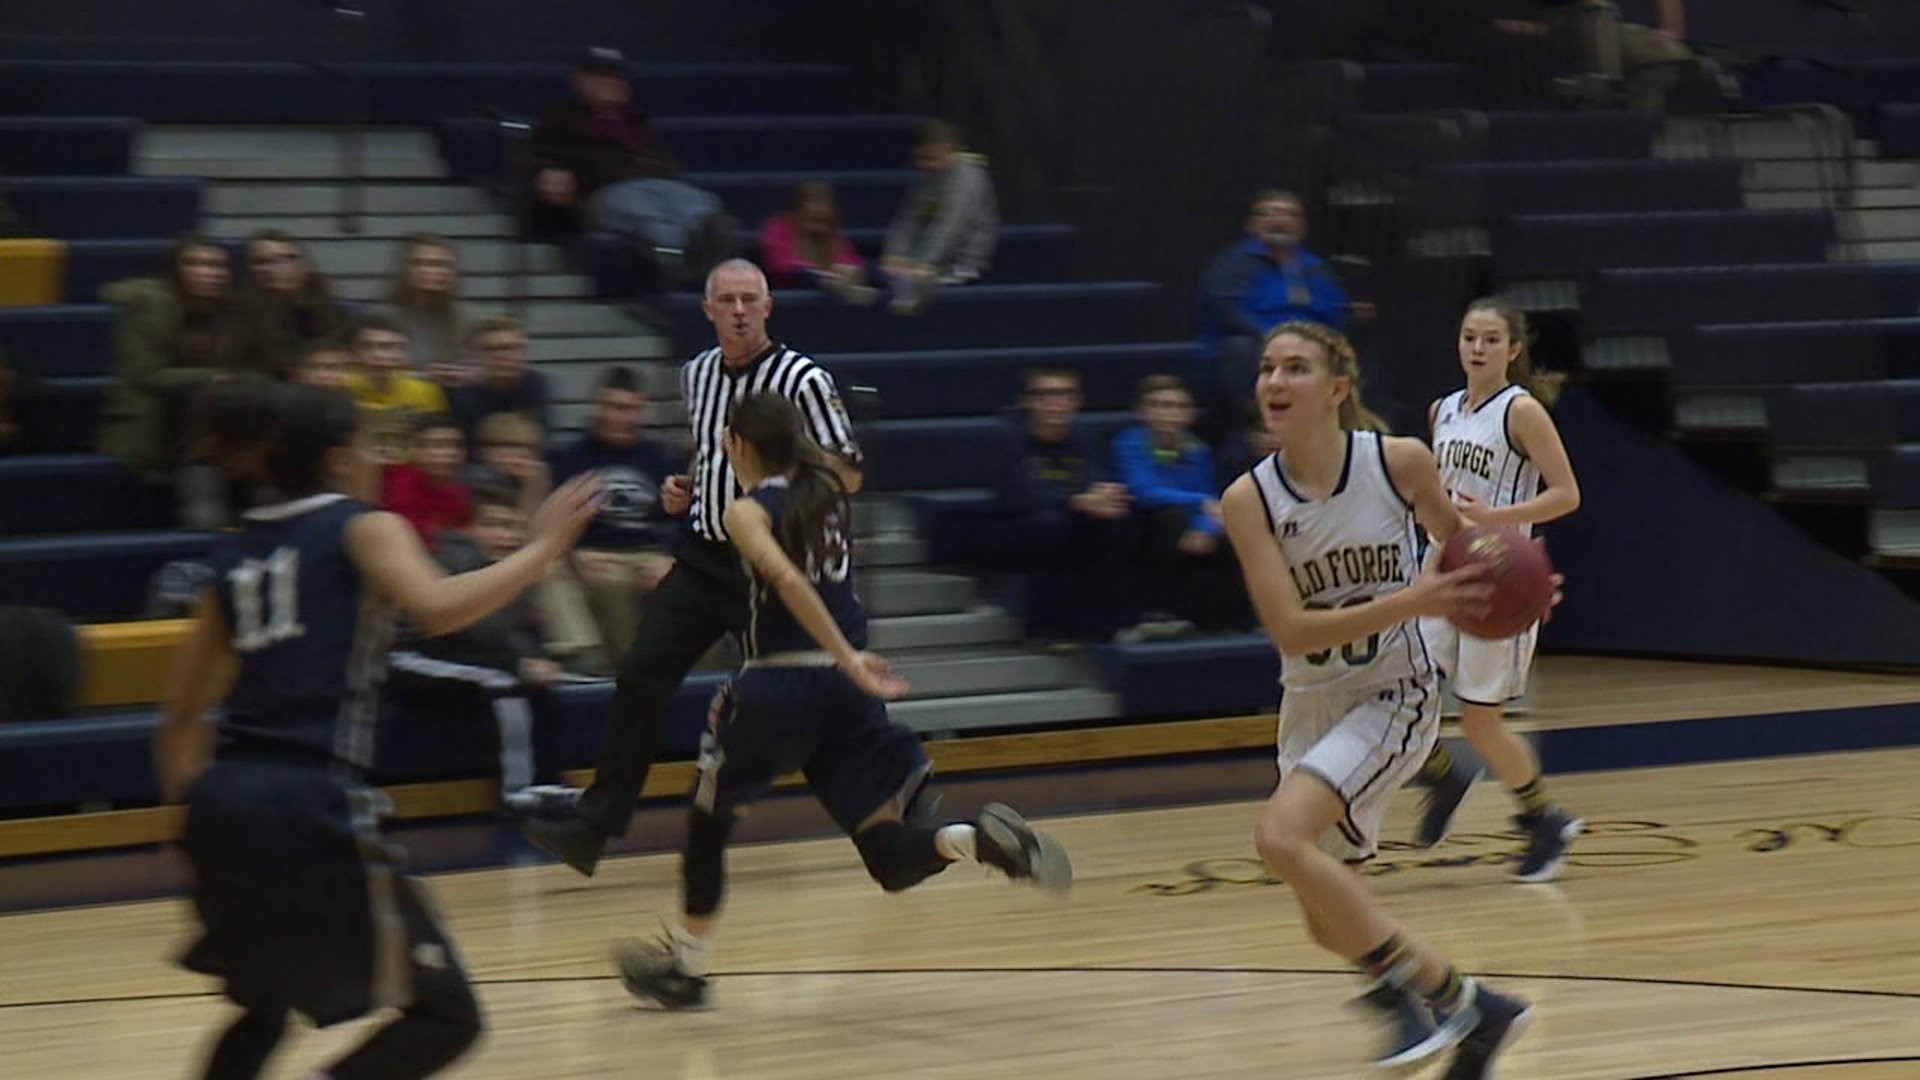 Welsh Leads Old Forge Girls to 65-28 Win Over G.A.R.